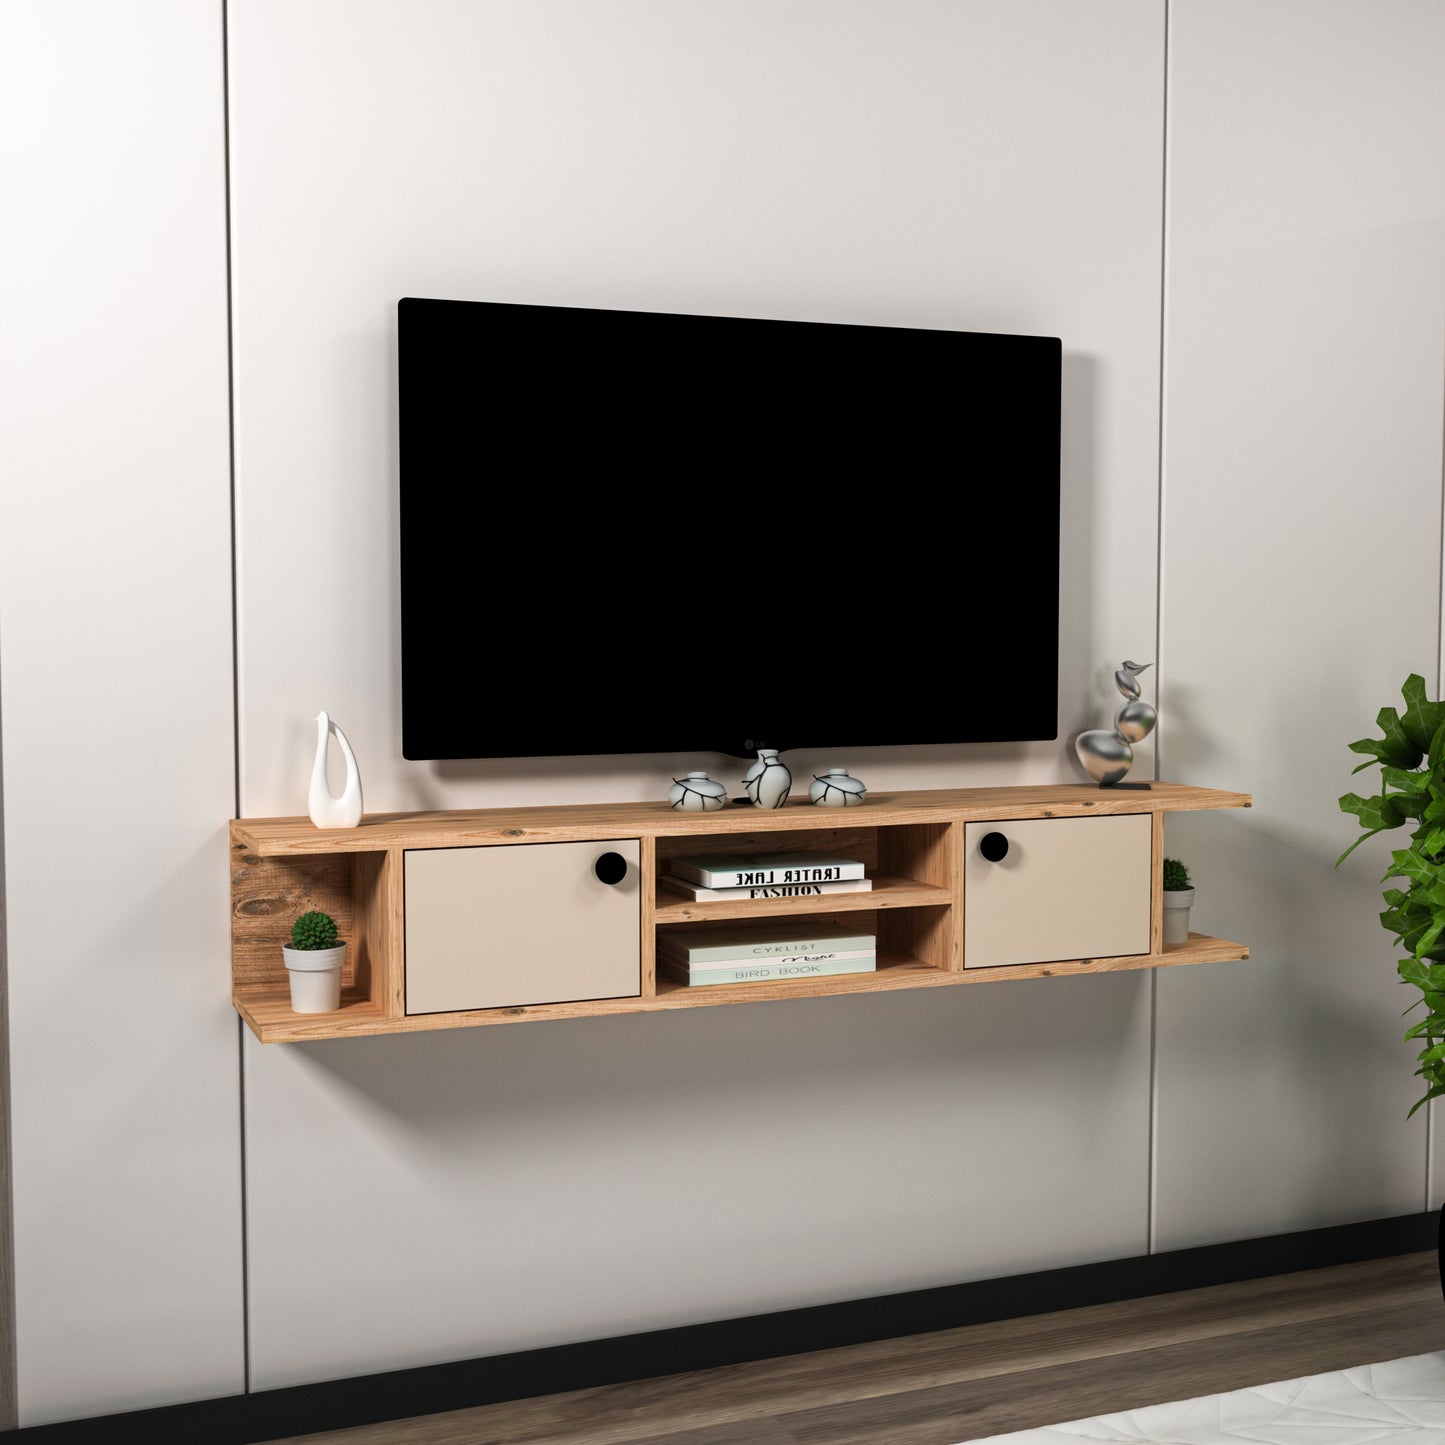 Joe Floating TV Stand with Shelves and Cabinets